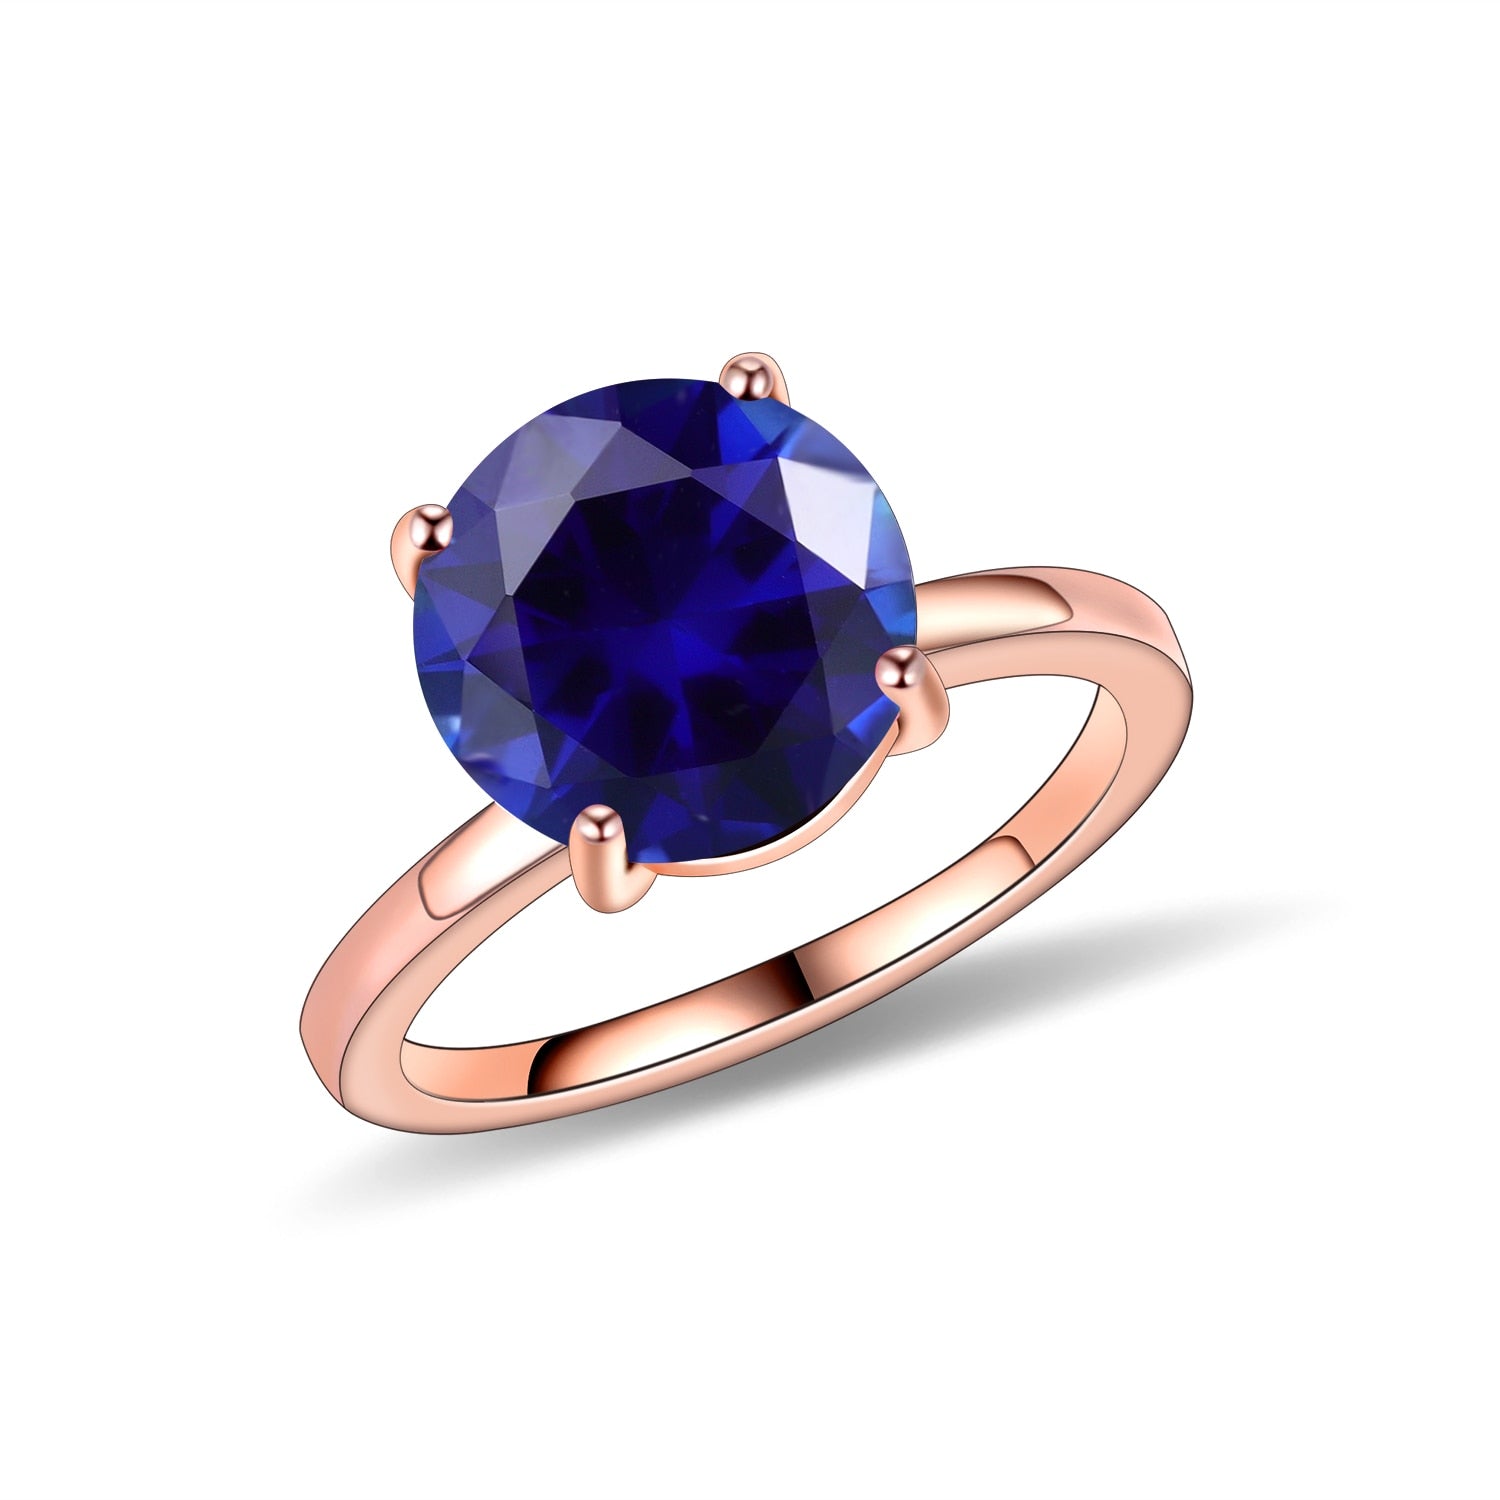 GEM'S BALLET Round Lab Blue Sapphire Four Prong Solitaire Engagement Rings 925 Sterling Silver Gemstone Ring Gift For Her lab Sapphire - R|10mm